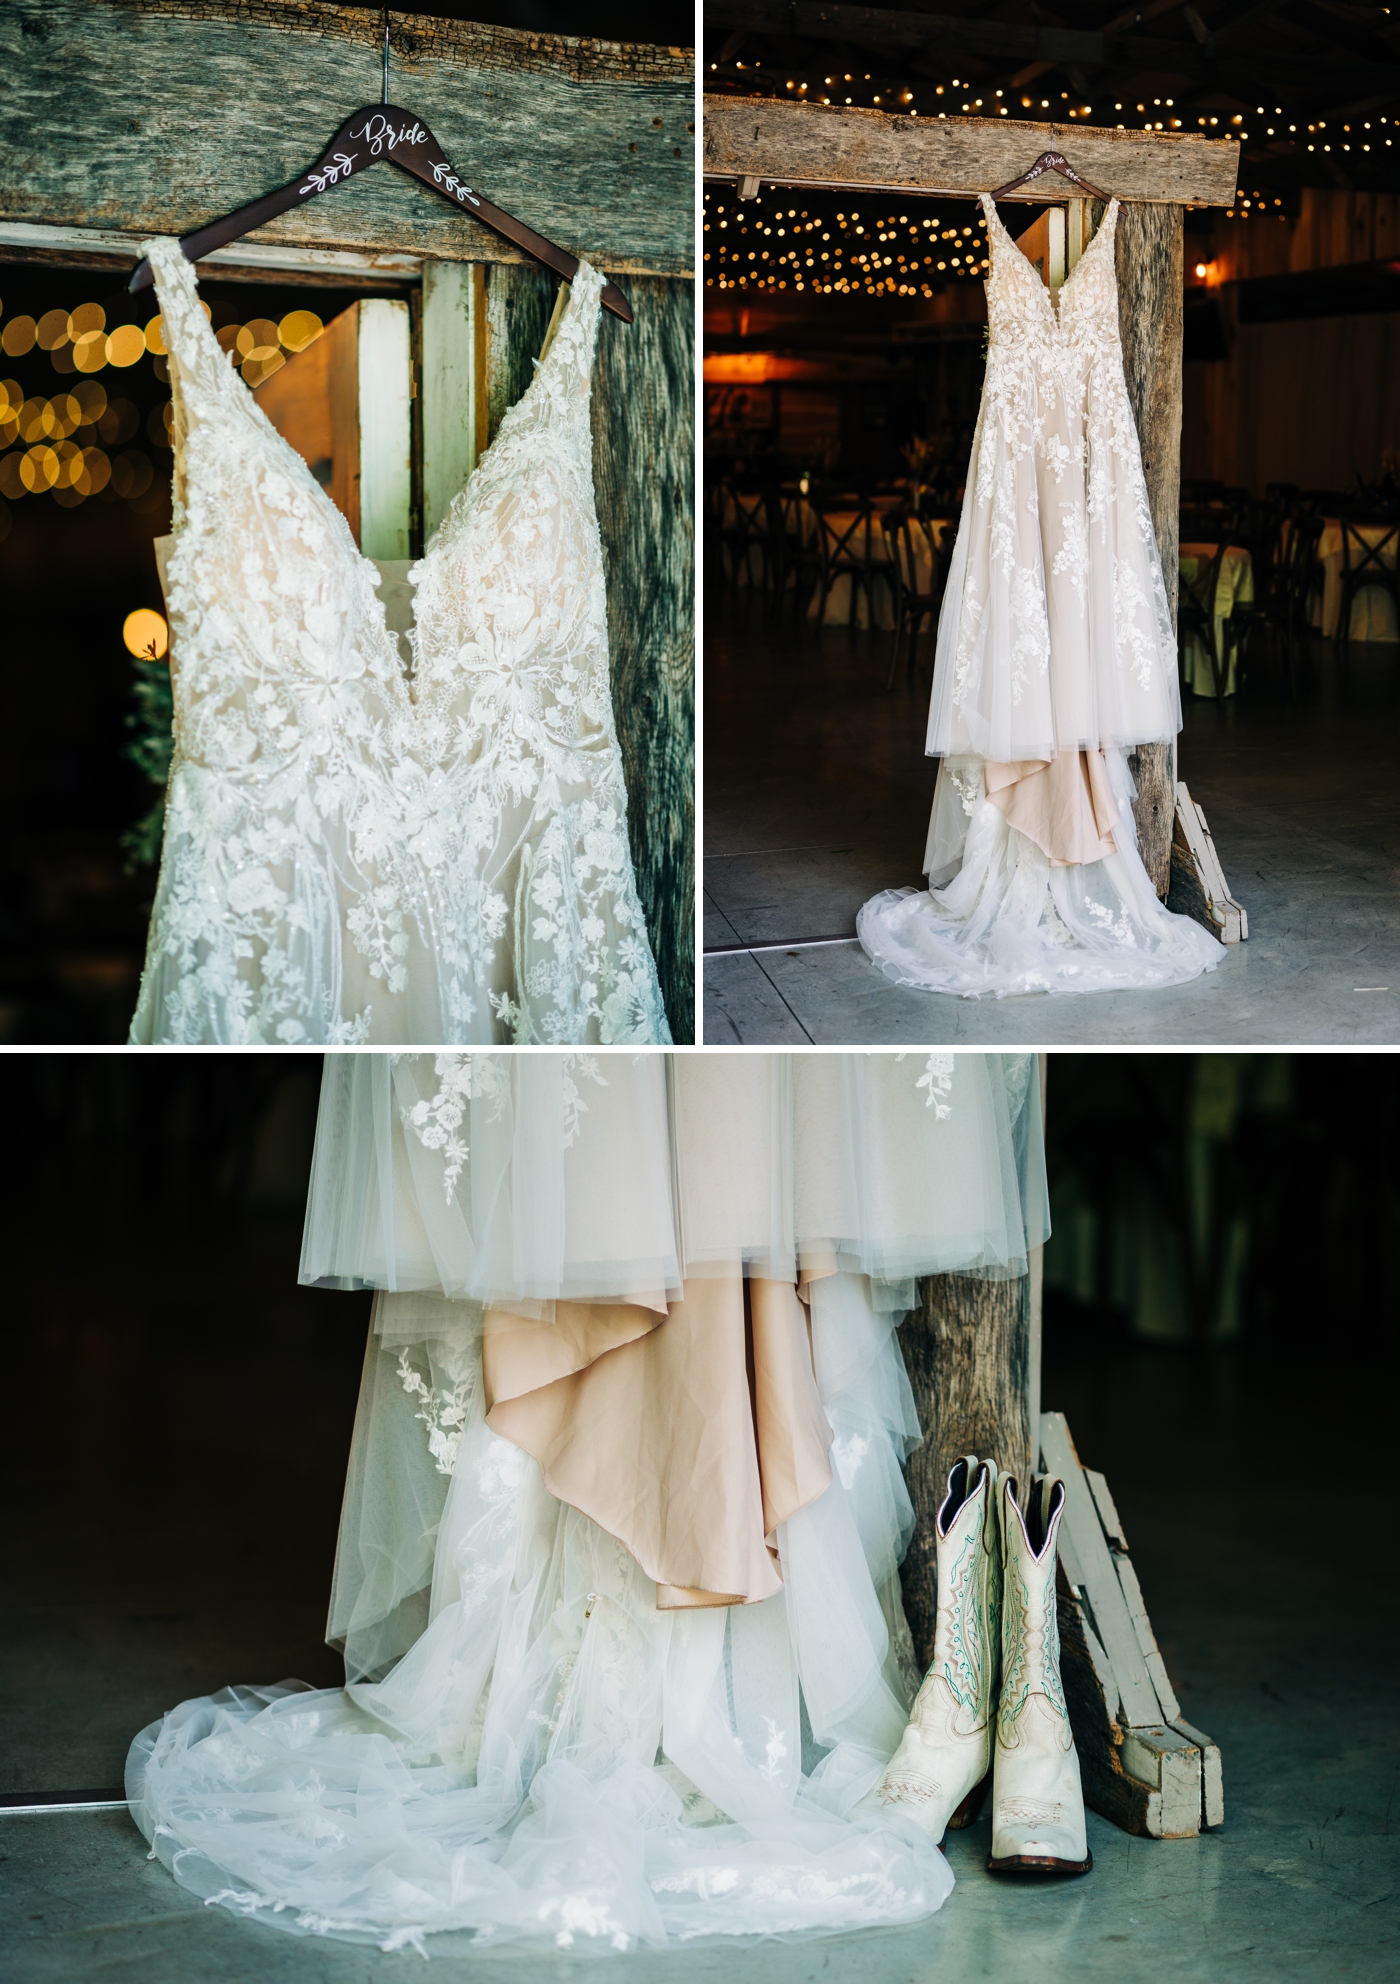 A-line wedding dress with lace details and boots for rustic wedding